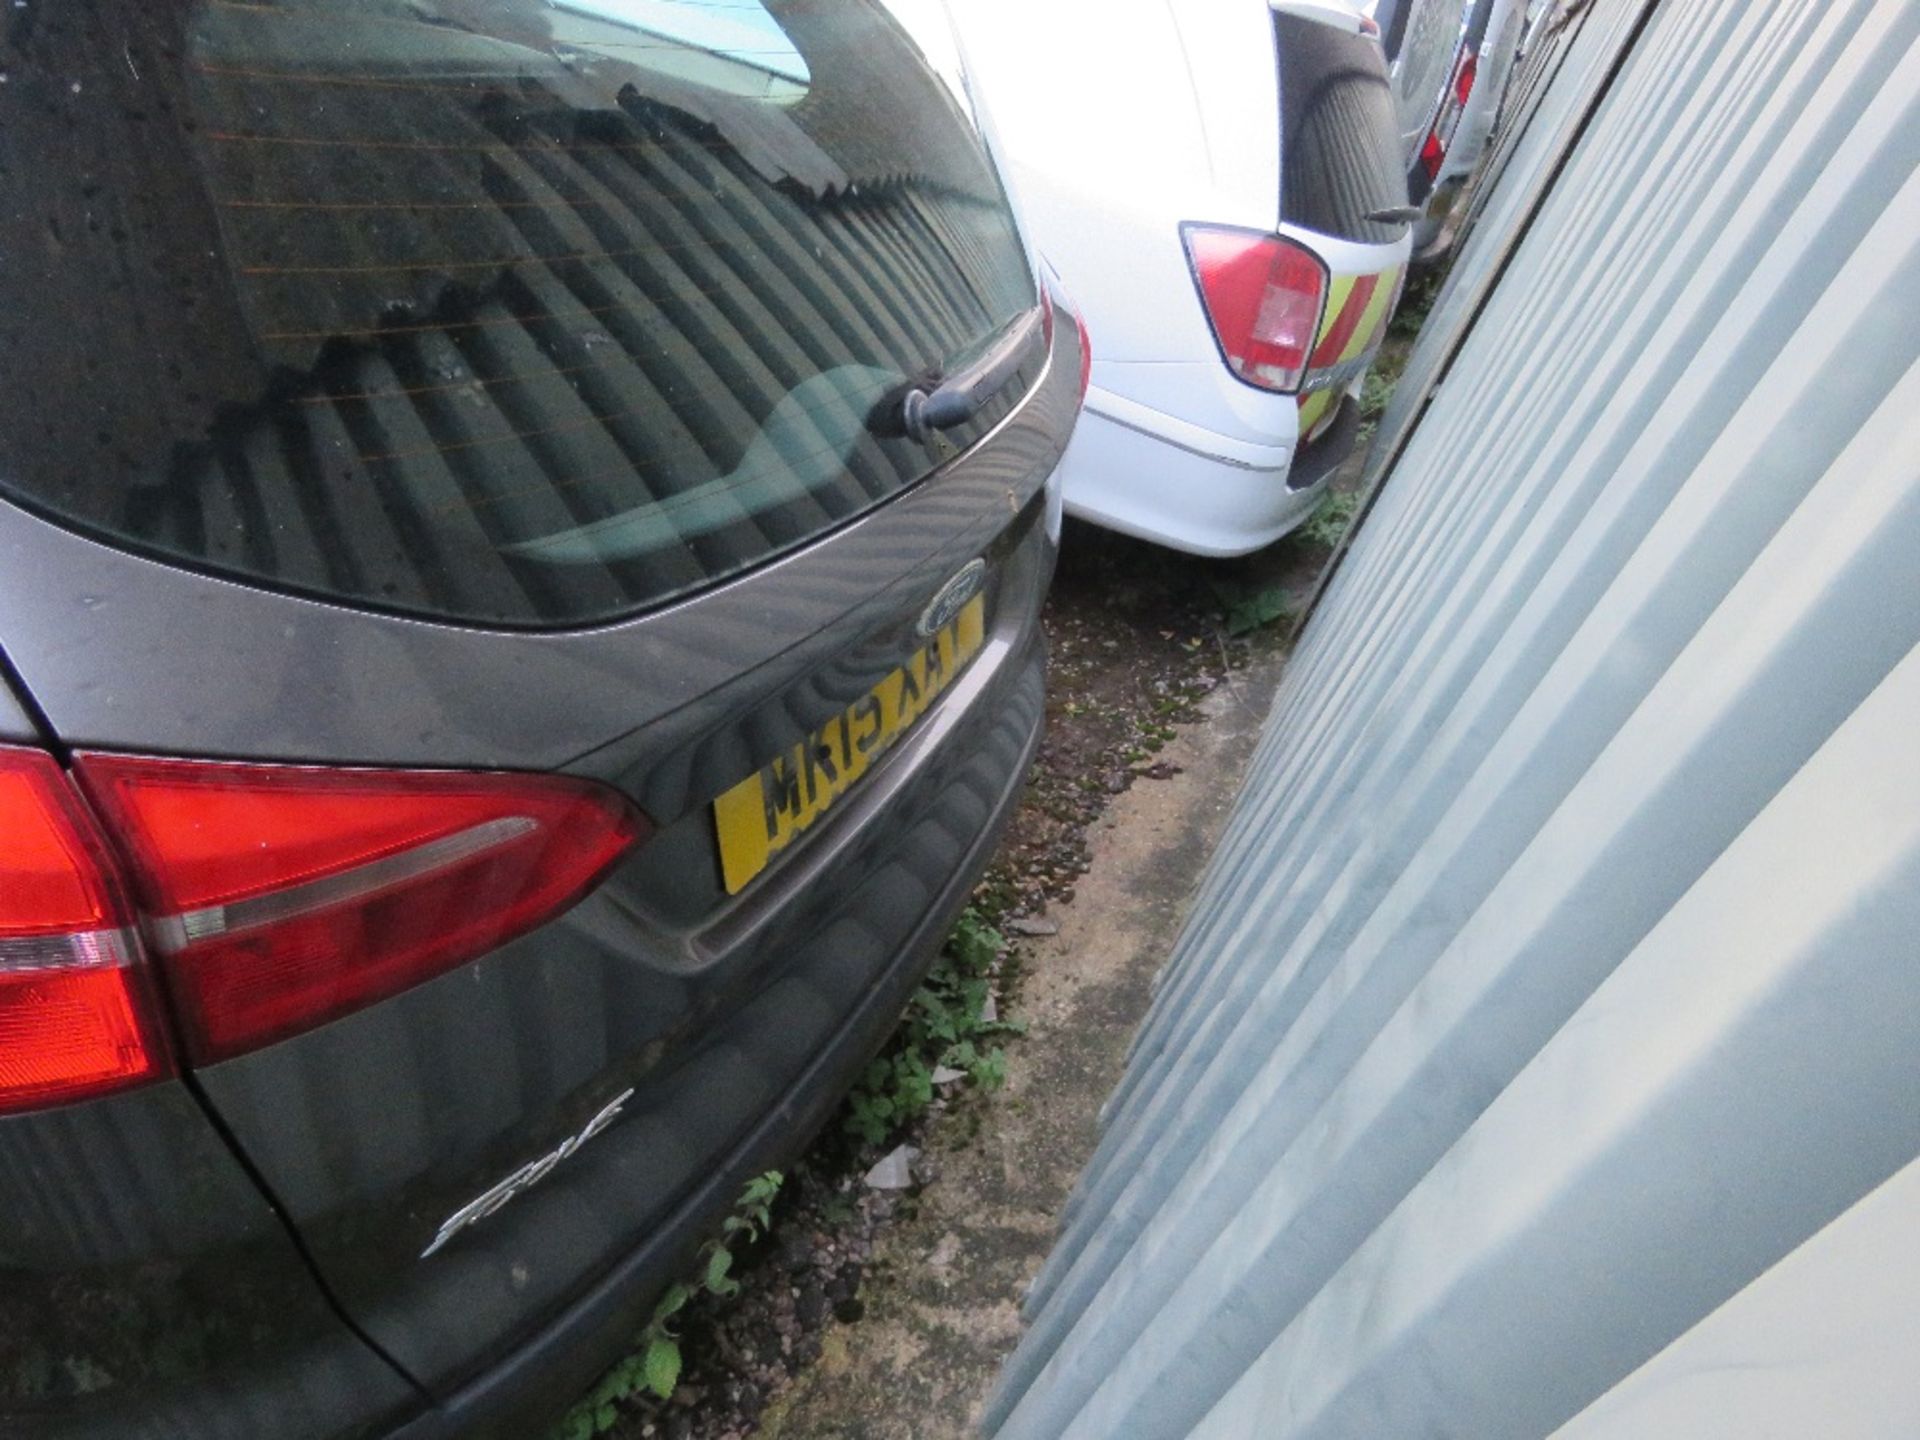 FORD FOCUS ESTATE CAR REG:MK15 XAY. SOLD AS NON RUNNER/ ENGINE REQUIRING ATTENTION. WITH V5 - Image 7 of 11